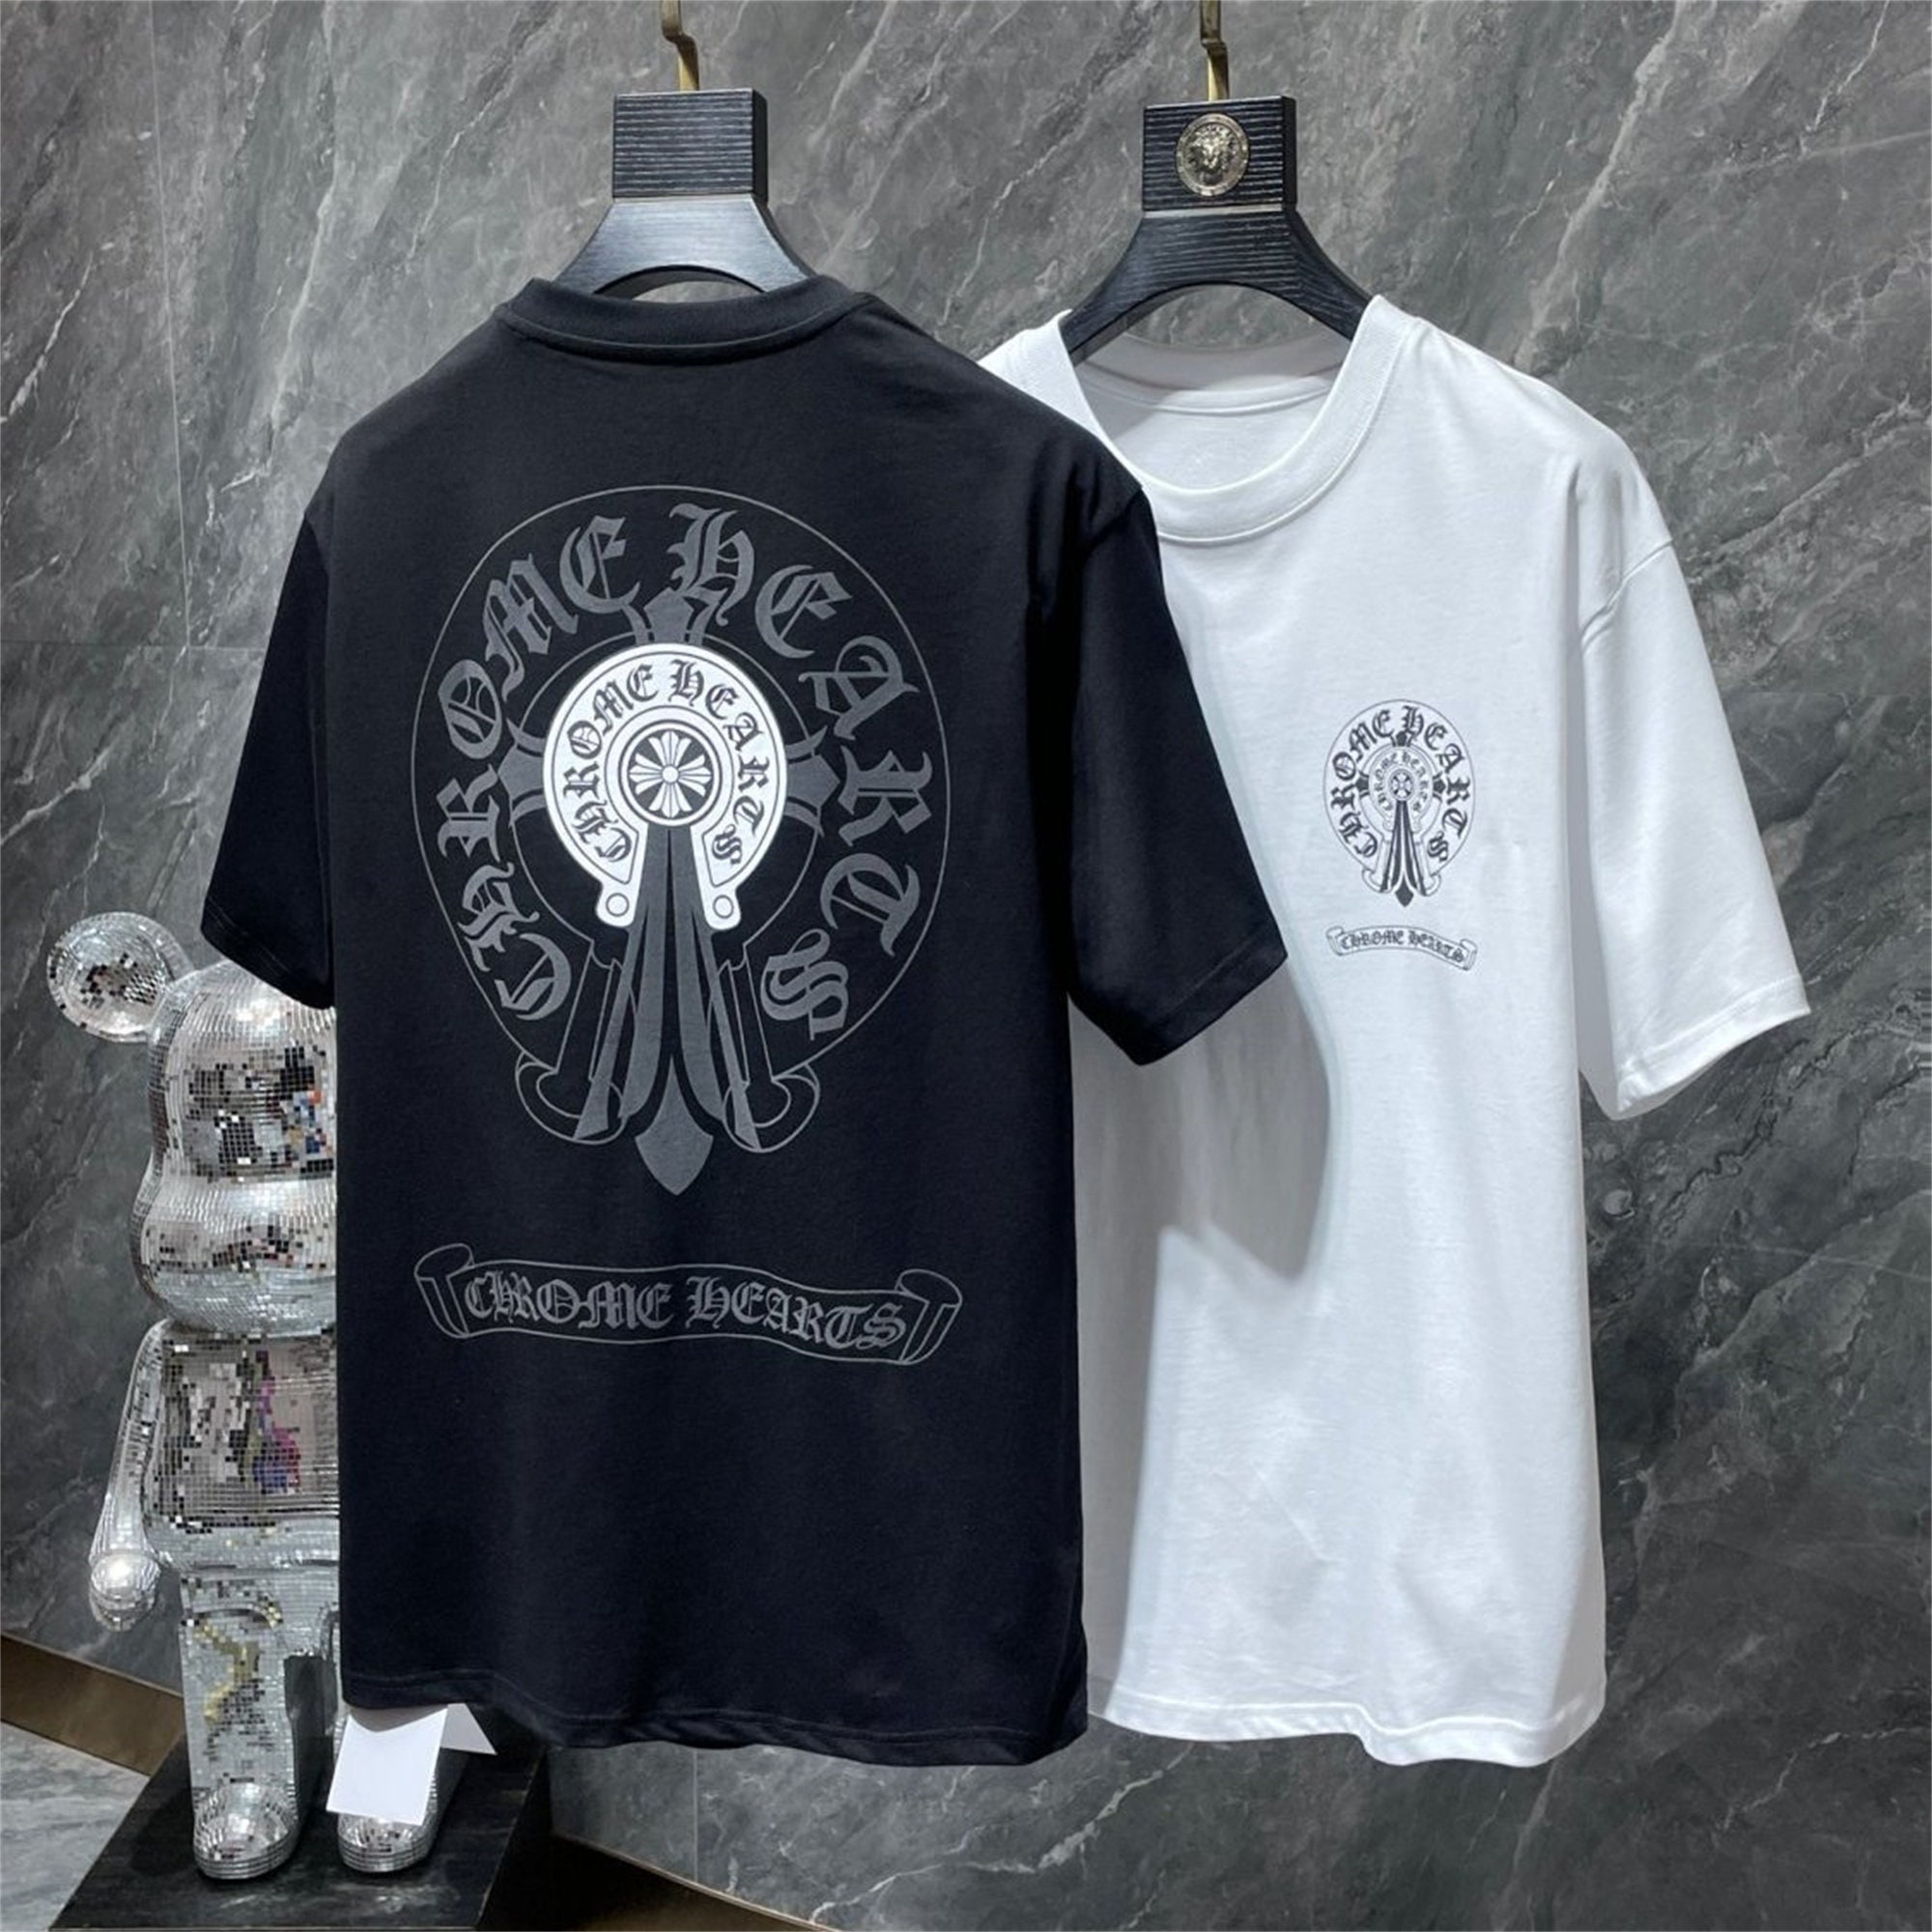 Chrome Hearts - Authenticated T-Shirt - Cotton White for Men, Very Good Condition